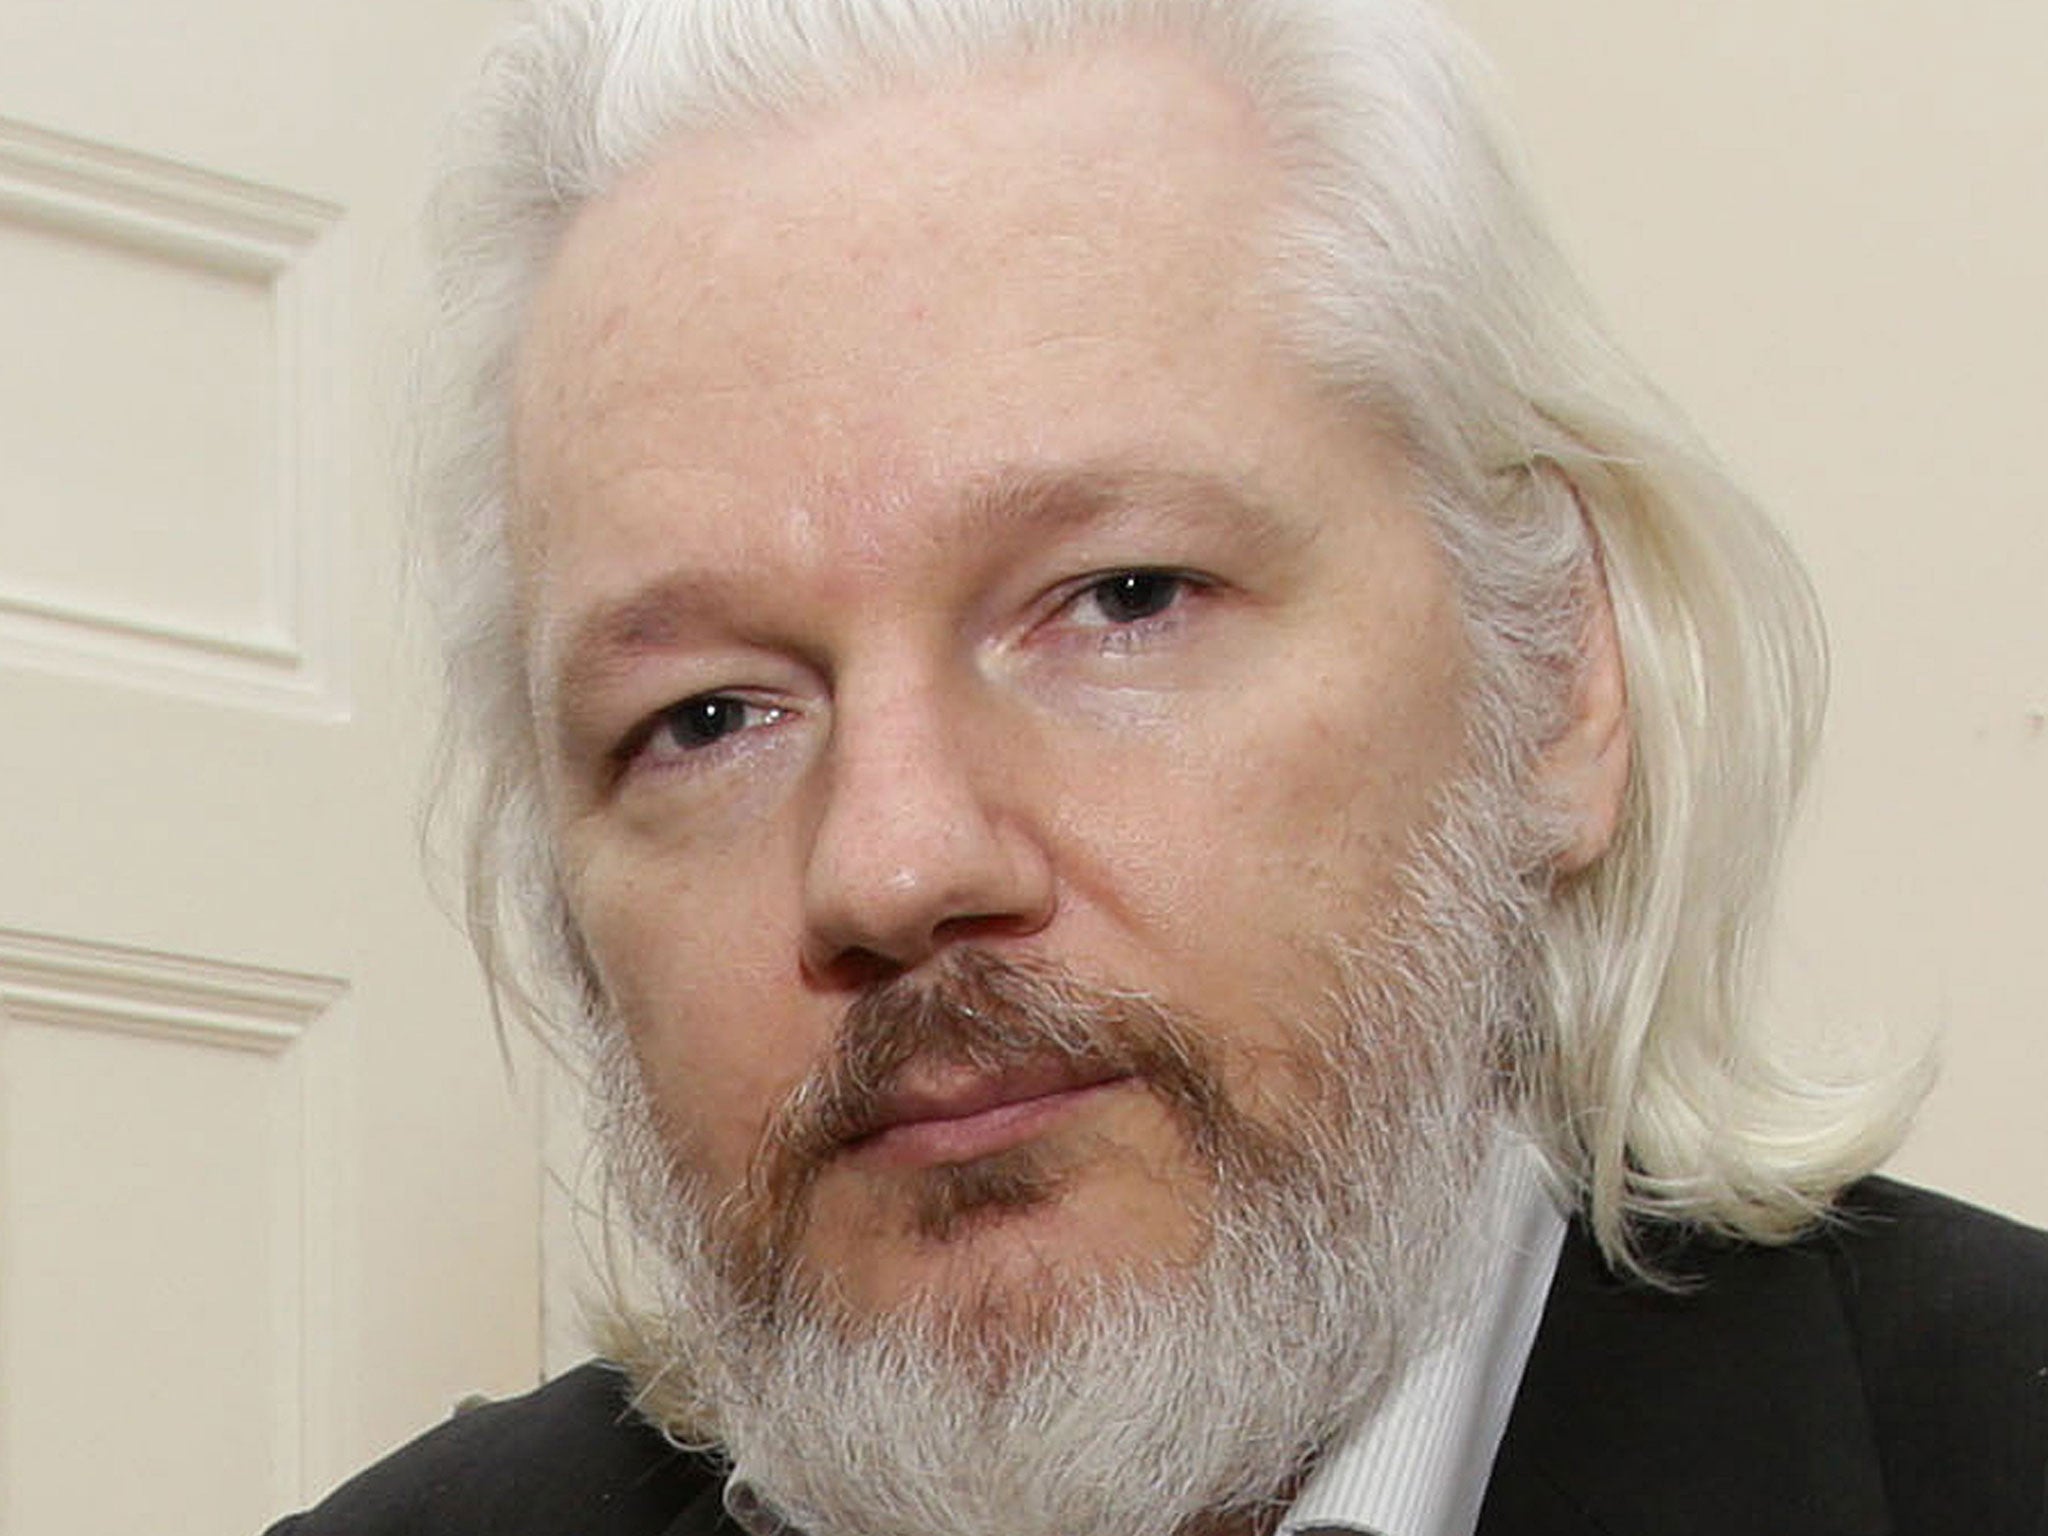 Julian Assange has been in the Ecuadorian embassy in London for more than three years